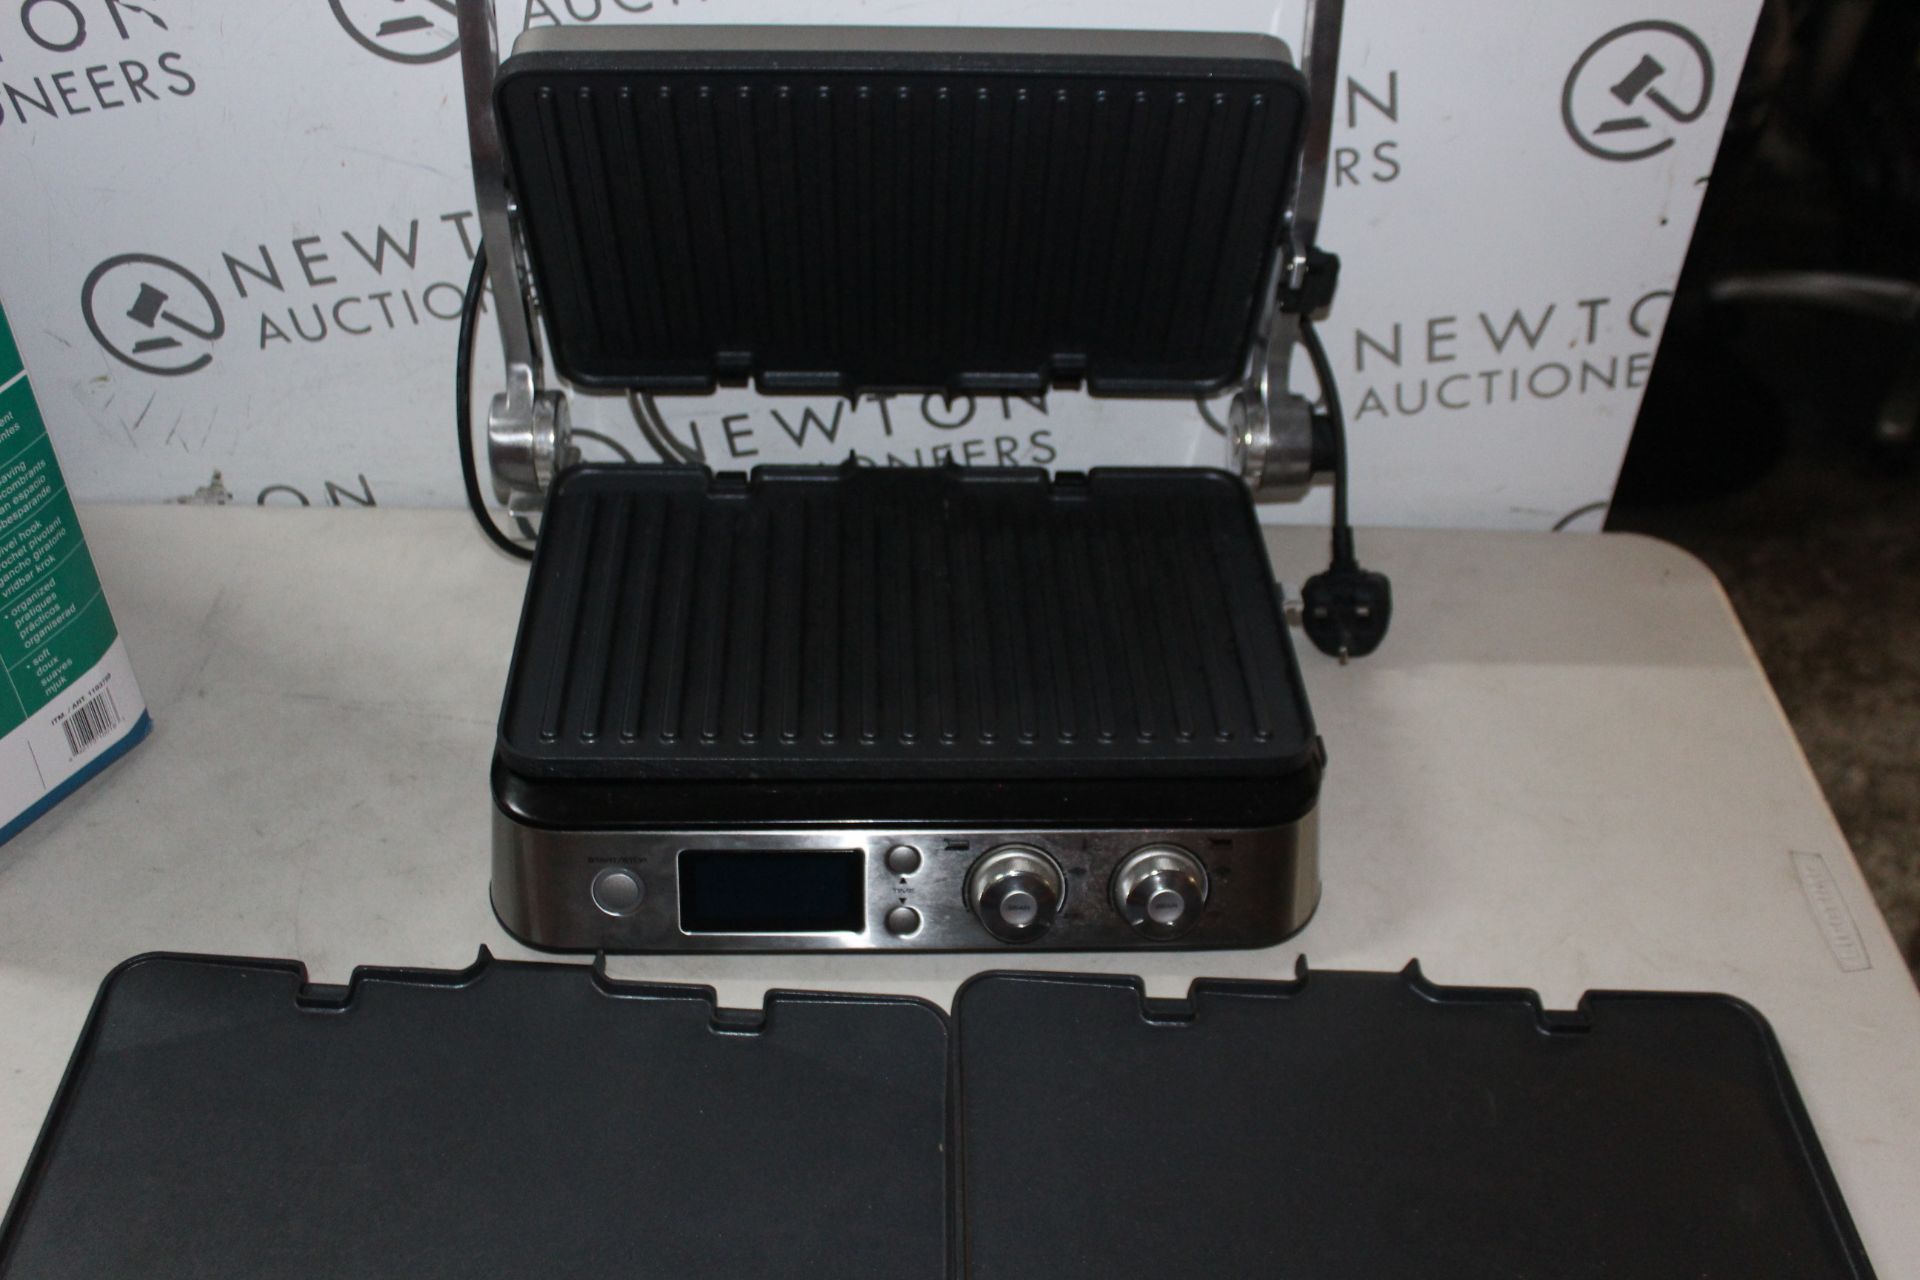 1 DE'LONGHI MULTIGRILL INCLUDING GRILL & GRIDDLE PLATES IN SILVER RRP Â£169.99